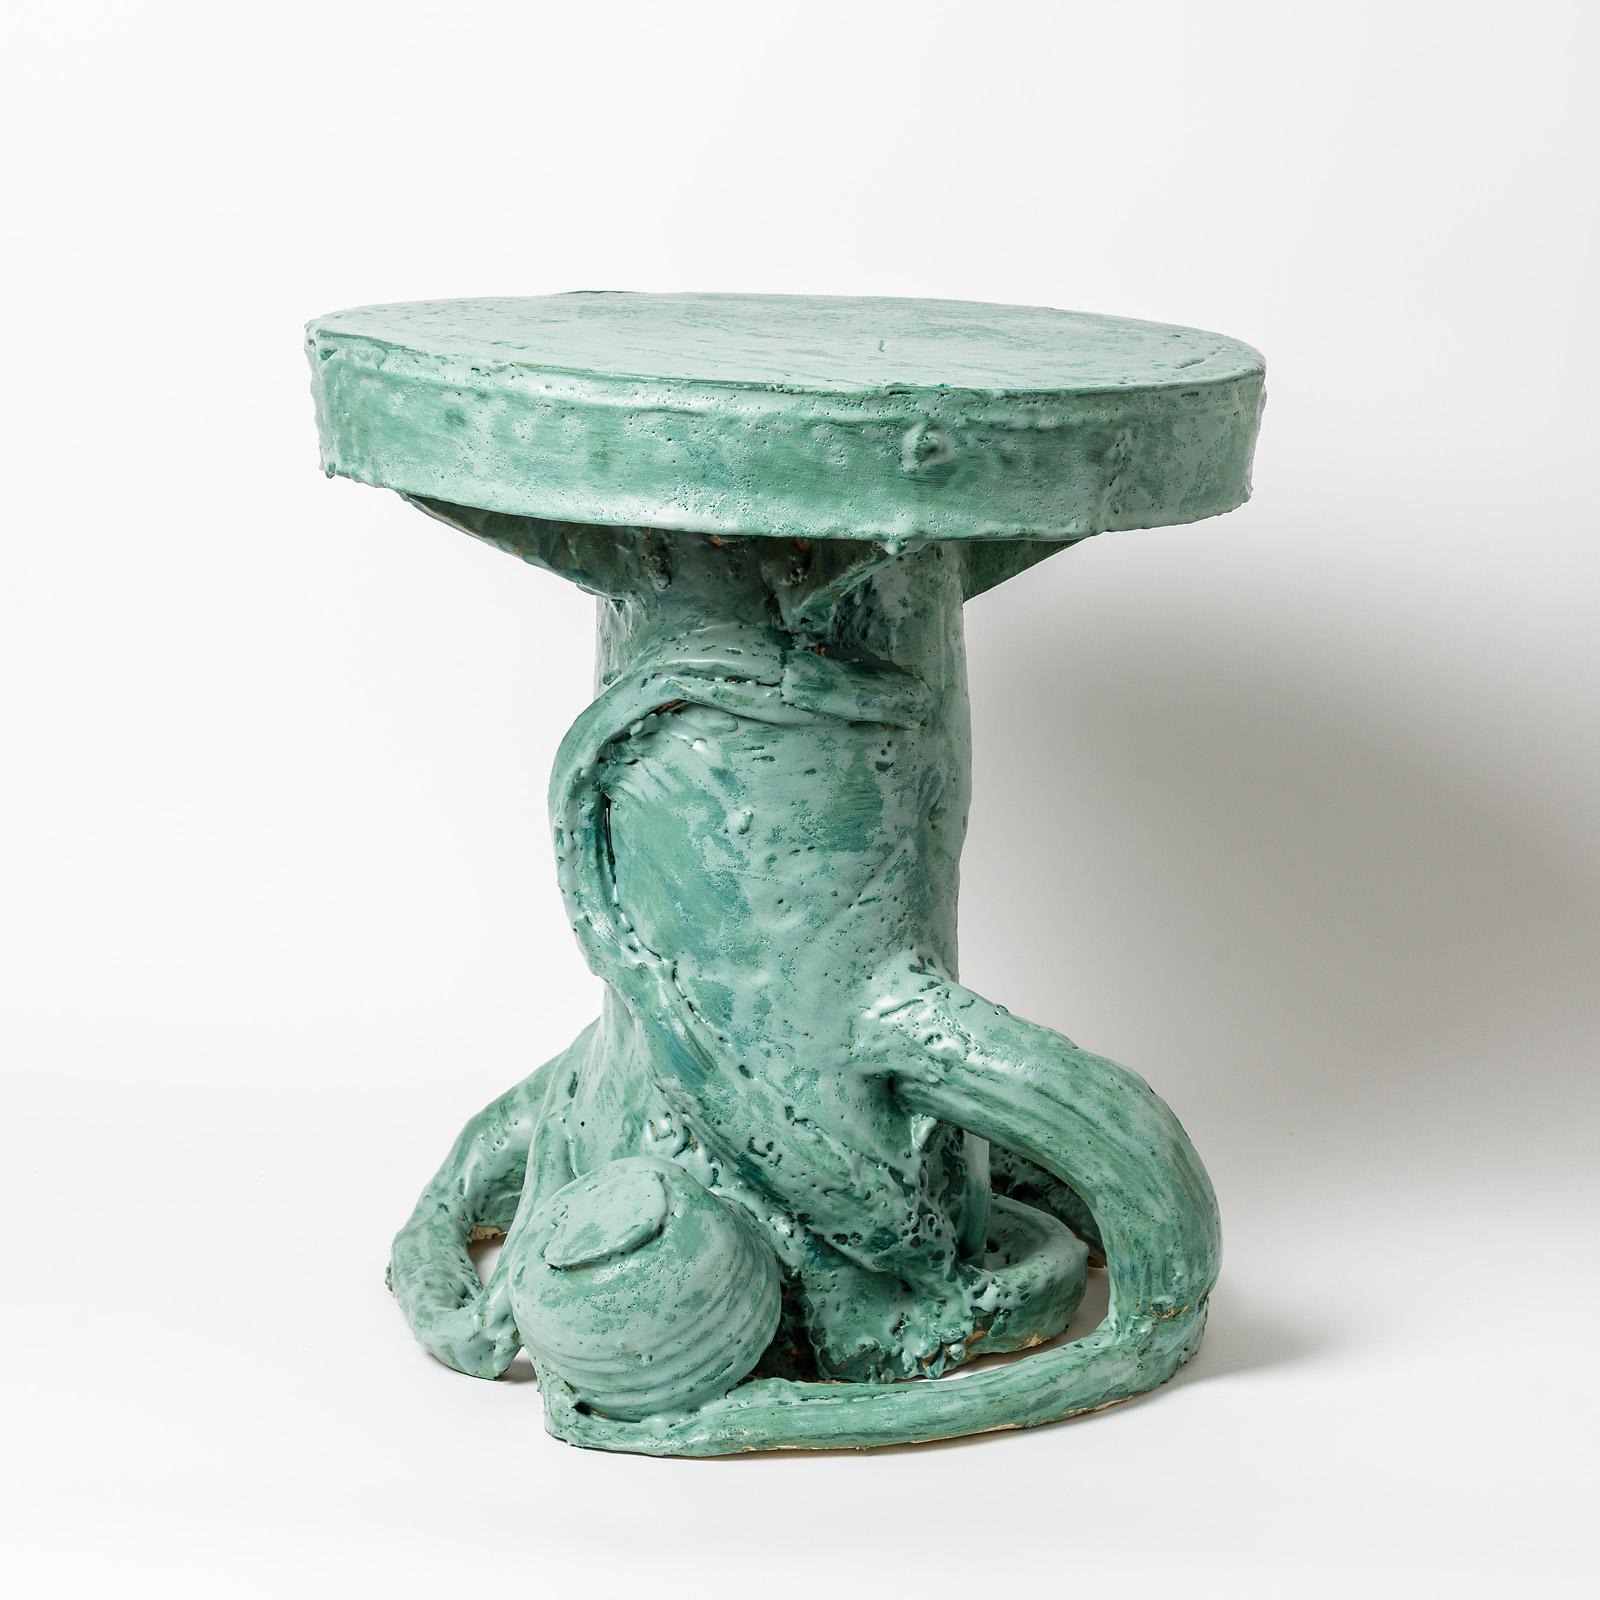 Beaux Arts Ceramic Table with Green Glaze Decoration by Patrick Crulis, 2021